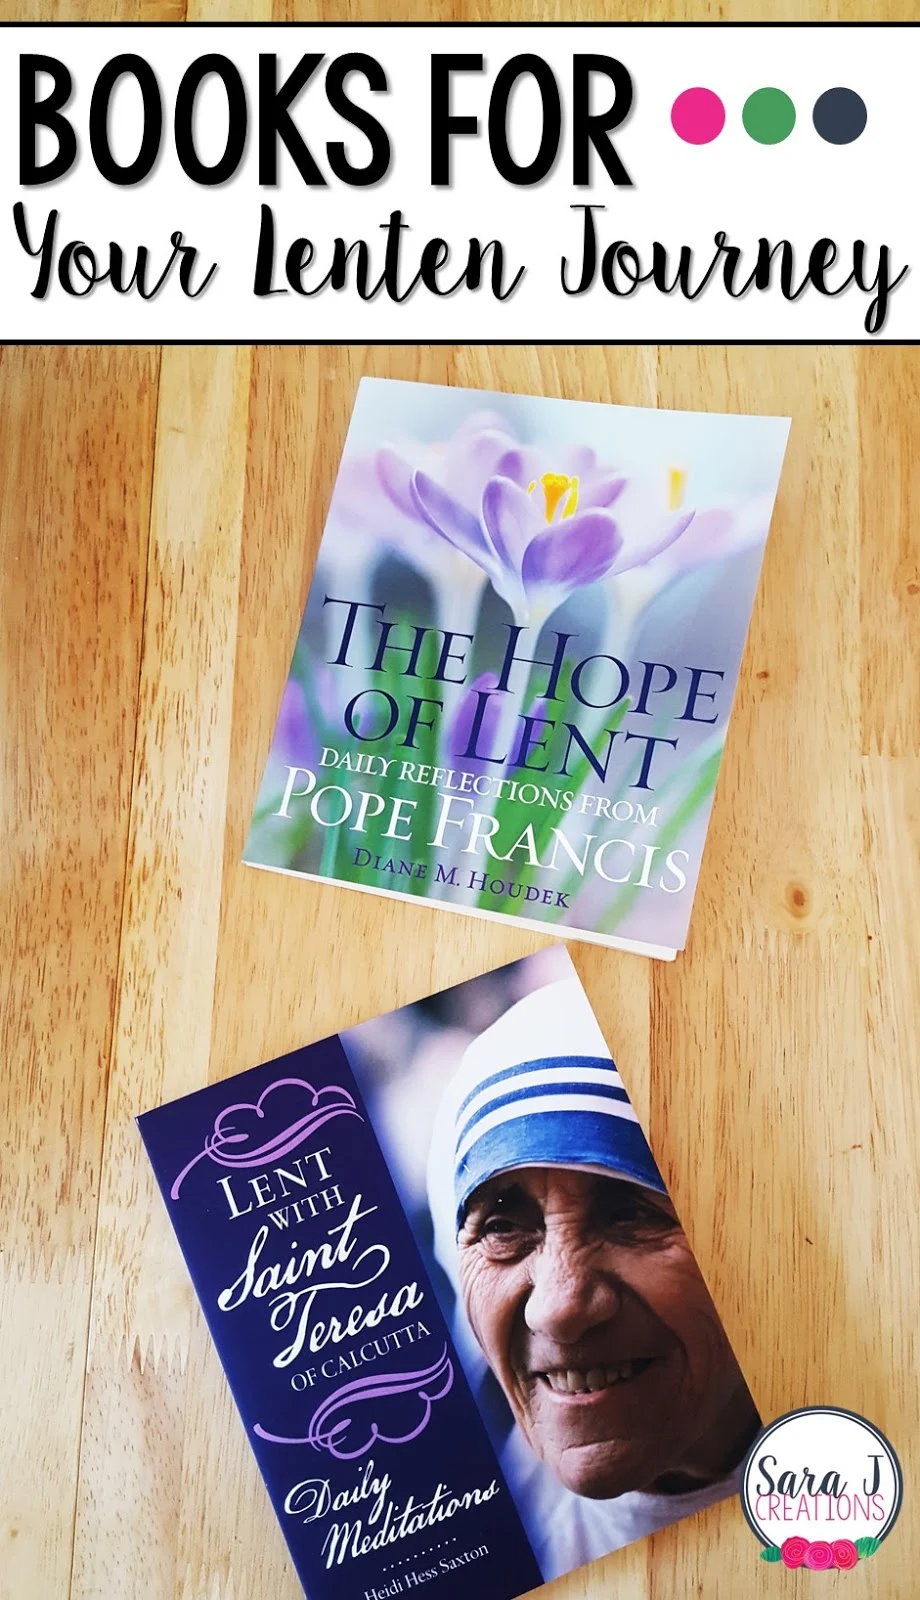 Two great books to help with your prayer life during Lent. Focused on the life and teachings of Mother Teresa and Pope Francis, this is a great read for Catholics preparing for Easter.